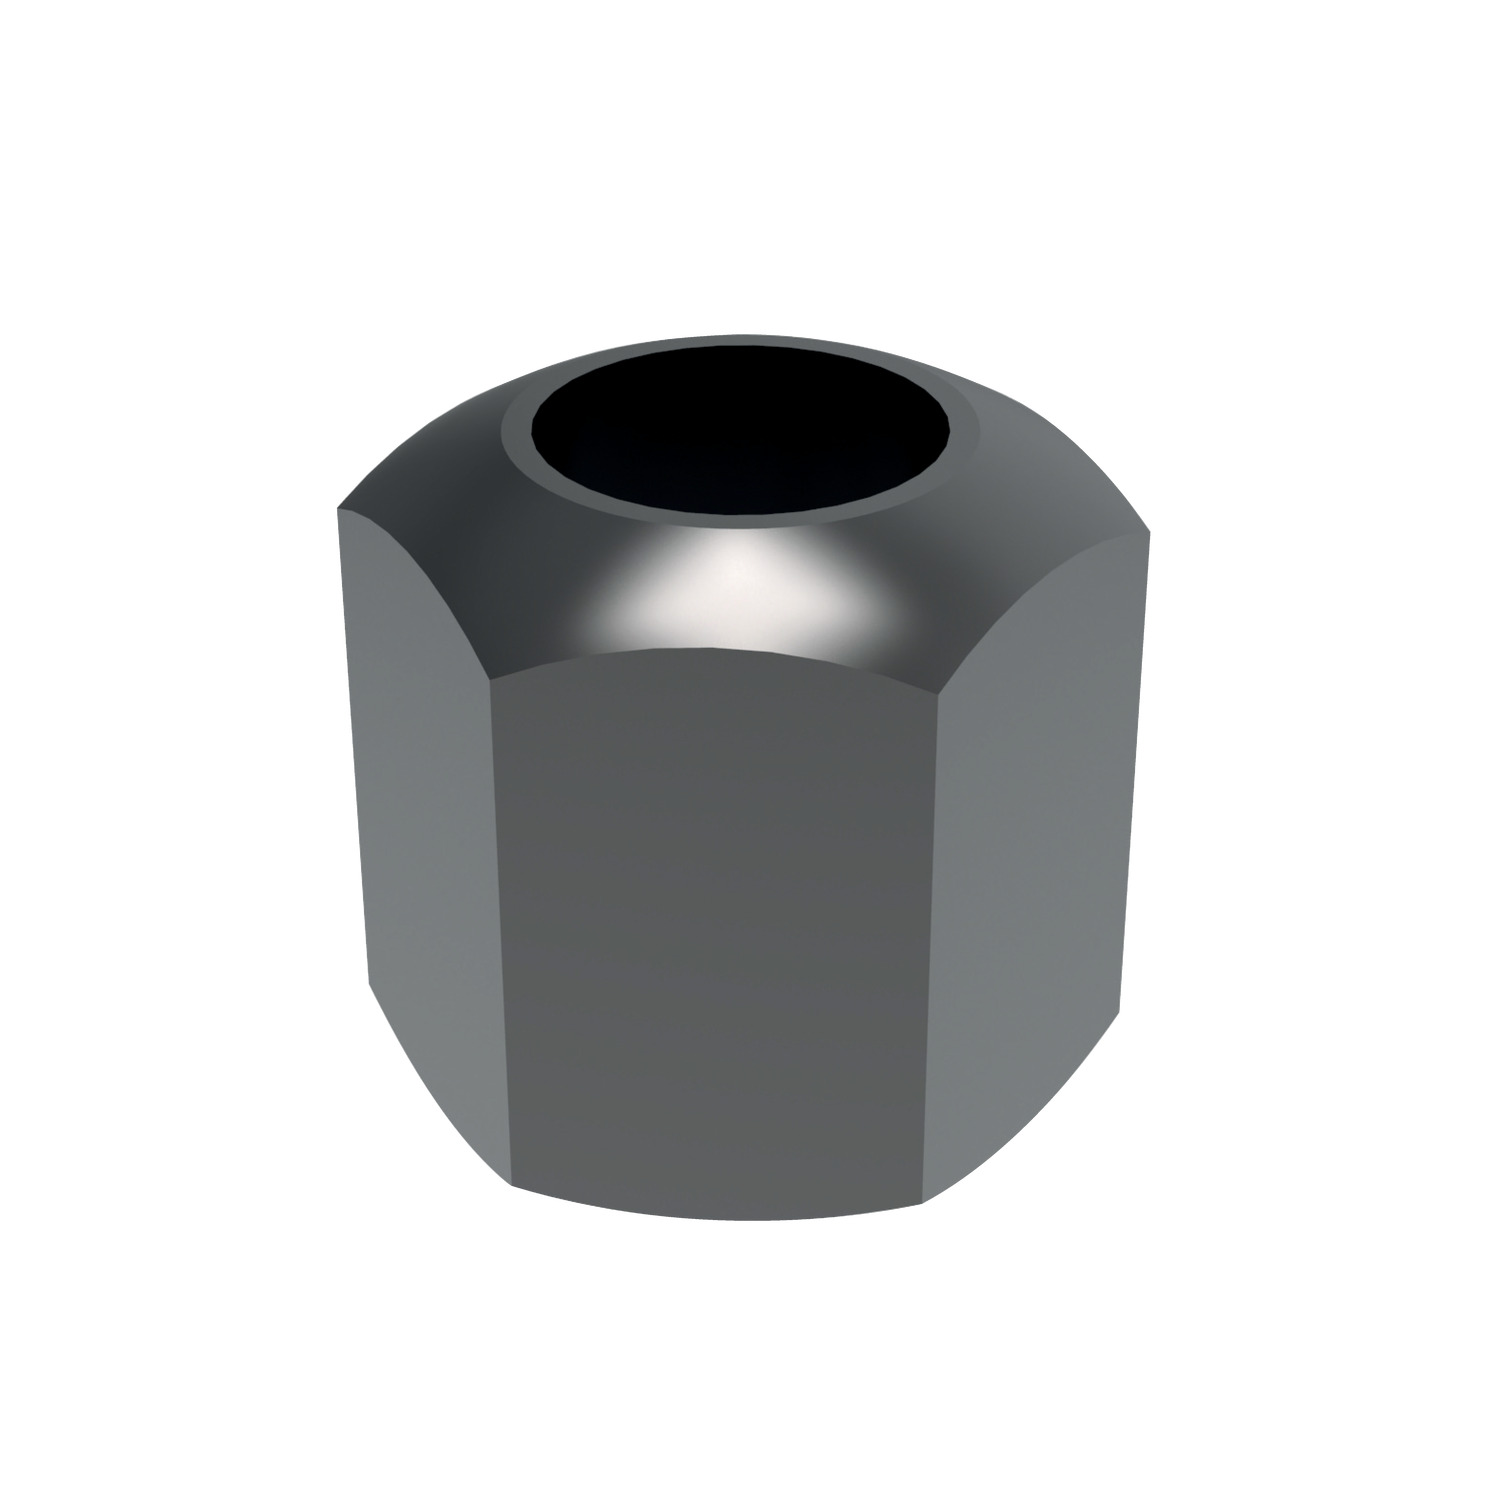 Fixture Nuts Steel strength class 10, heat treated fixture nuts made to DIN 508. Free CAD models are available for our fixture nut products.